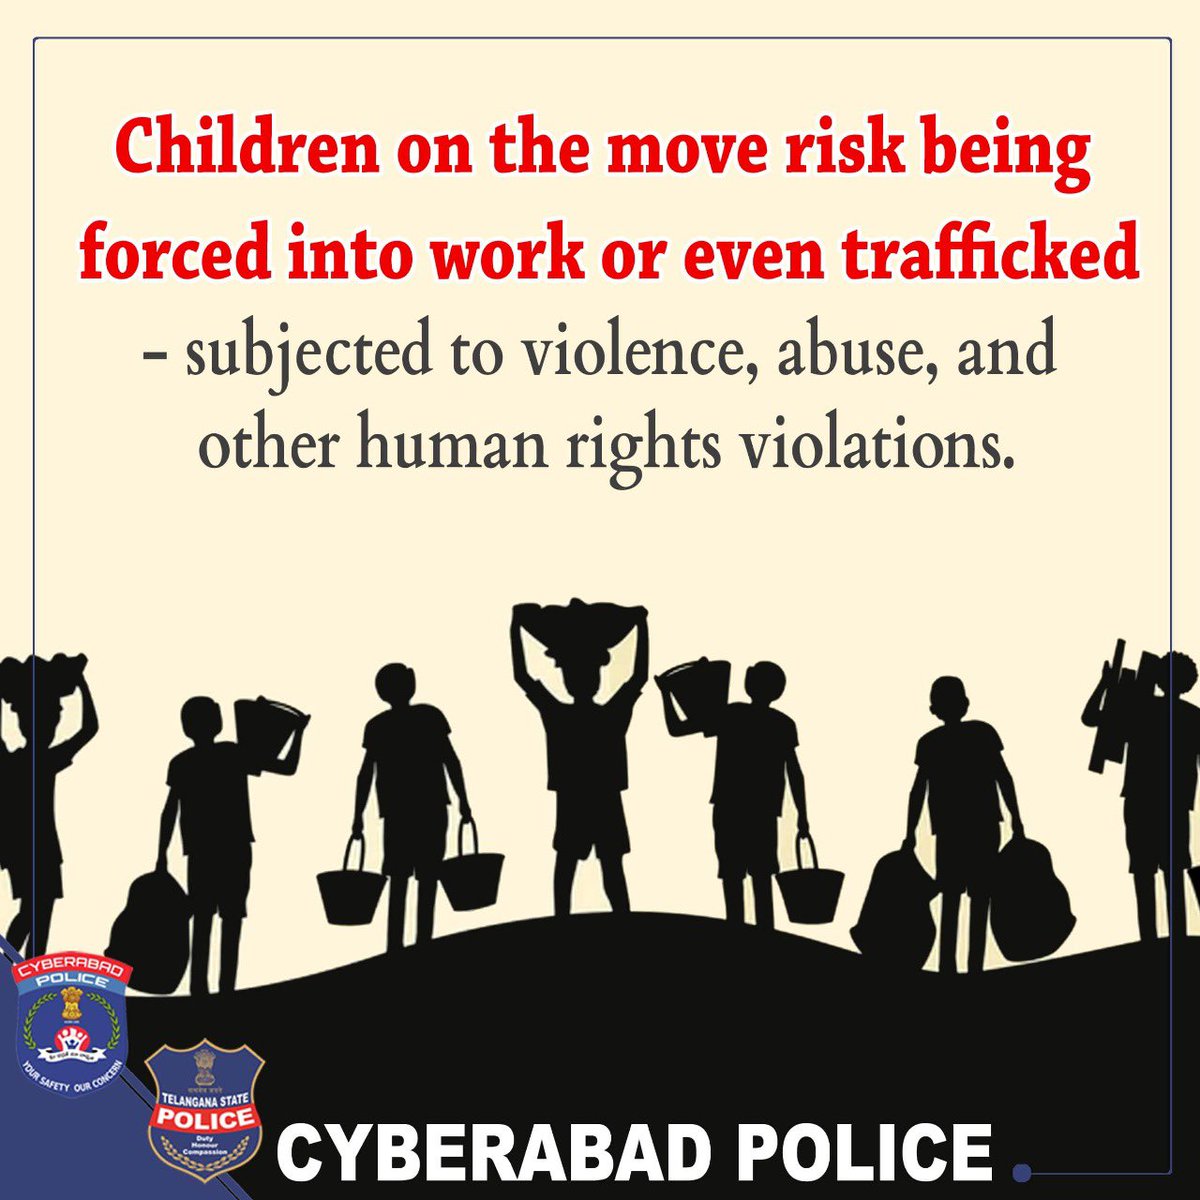 Whatever the cause, child labor compounds social inequality and discrimination and robs girls and boys of their childhood.

#ChildLabour #SayNoToChildLabour